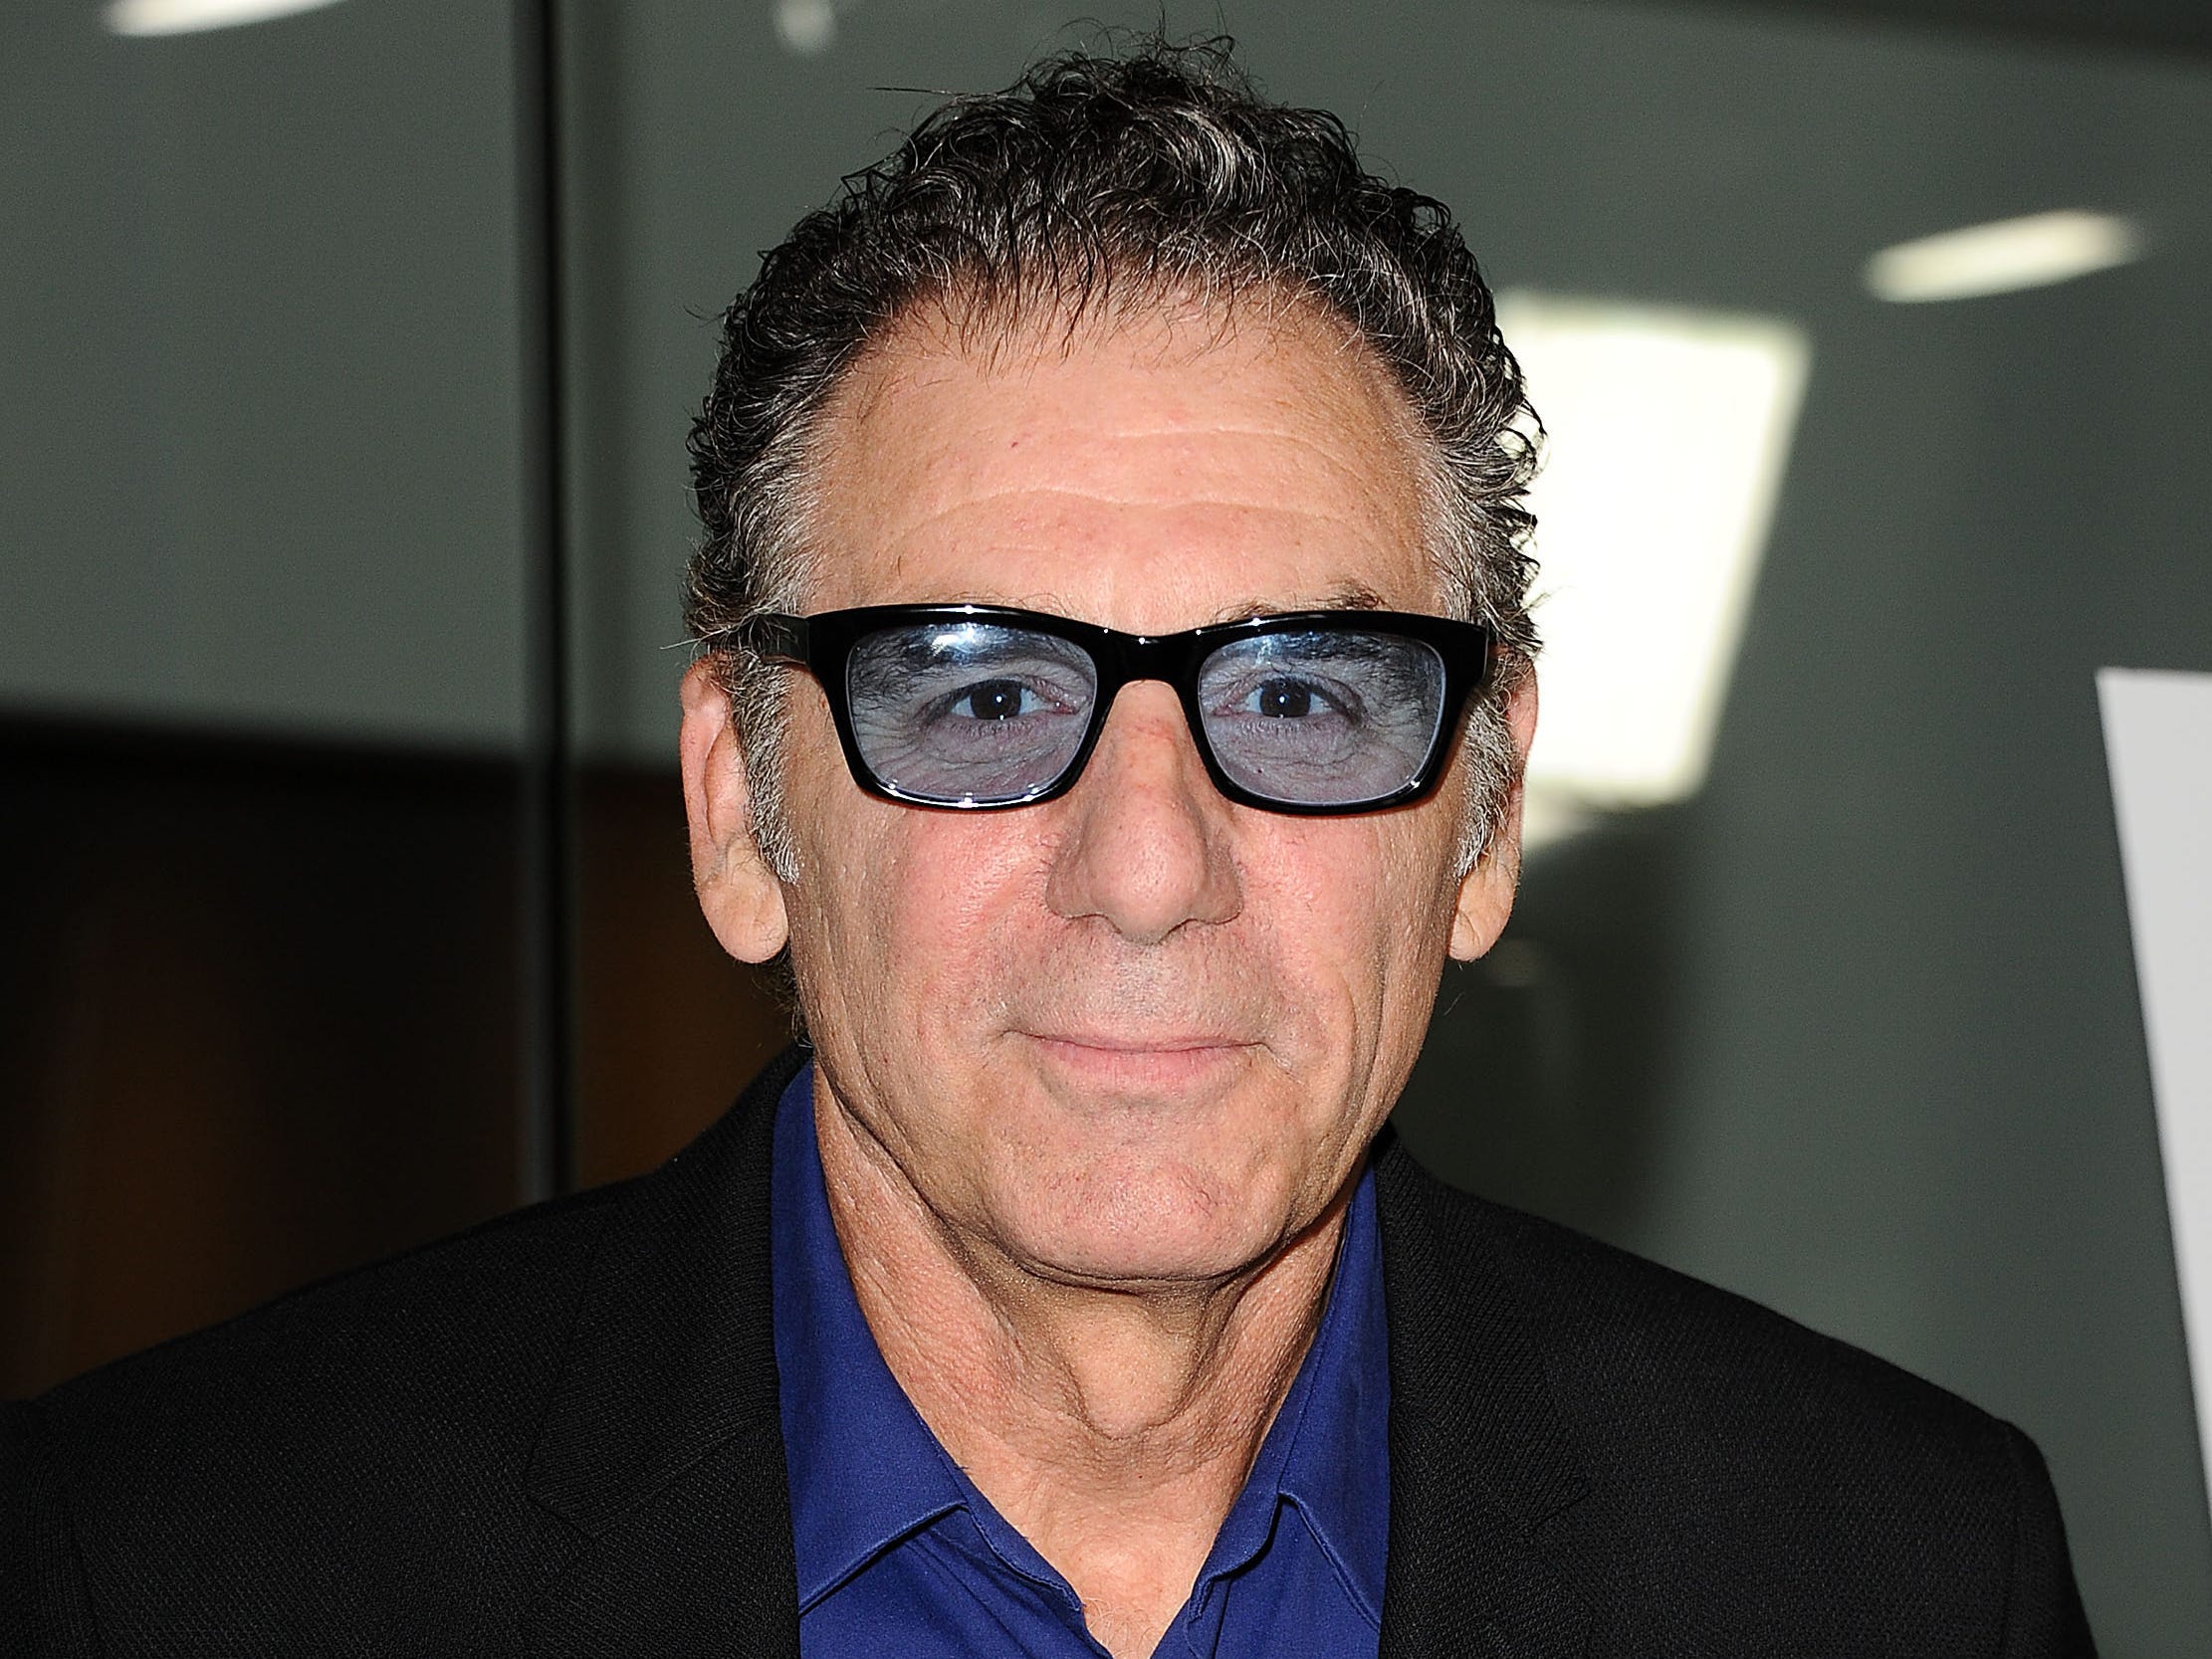 <p>In 2000, Richards went on to play the lead in the eponymous "The Michael Richards Show" on NBC, which was <a href="https://www.latimes.com/archives/la-xpm-2000-dec-08-ca-62742-story.html">canceled</a> shortly after its debut. </p><p>He returned to stand-up and famously found himself in hot water during a performance at the Laugh Factory comedy club in late 2006 for <a href="https://www.washingtonpost.com/wp-dyn/content/article/2006/11/21/AR2006112100242.html">hurling racist epithets</a> at a group of audience members. The incident was caught on video and led to a <a href="https://entertainment.time.com/2013/11/27/michael-richards-on-his-return-to-comedy/">hiatus from stand-up</a>. </p><p>Richards appeared on "Curb Your Enthusiasm" from "Seinfeld" co-creator Larry David in 2009. The season-seven episode <a href="https://ew.com/article/2009/09/02/jerry-seinfeld-reunion-curb/">featured a reunion</a> of the core "Seinfeld" cast <a href="https://www.theguardian.com/media/2009/oct/05/seinfeld-curb-your-enthusiasm">for the first time</a> since the finale.</p><p>Other television stints included the role of Frank on the TV Land sitcom "Kirstie" and a gig on the <a href="https://www.imdb.com/title/tt8310924/">2019 romantic comedy</a> "Faith, Hope & Love."</p><p>Most recently, he reunited with Seinfeld on his first red carpet in almost a decade. </p>